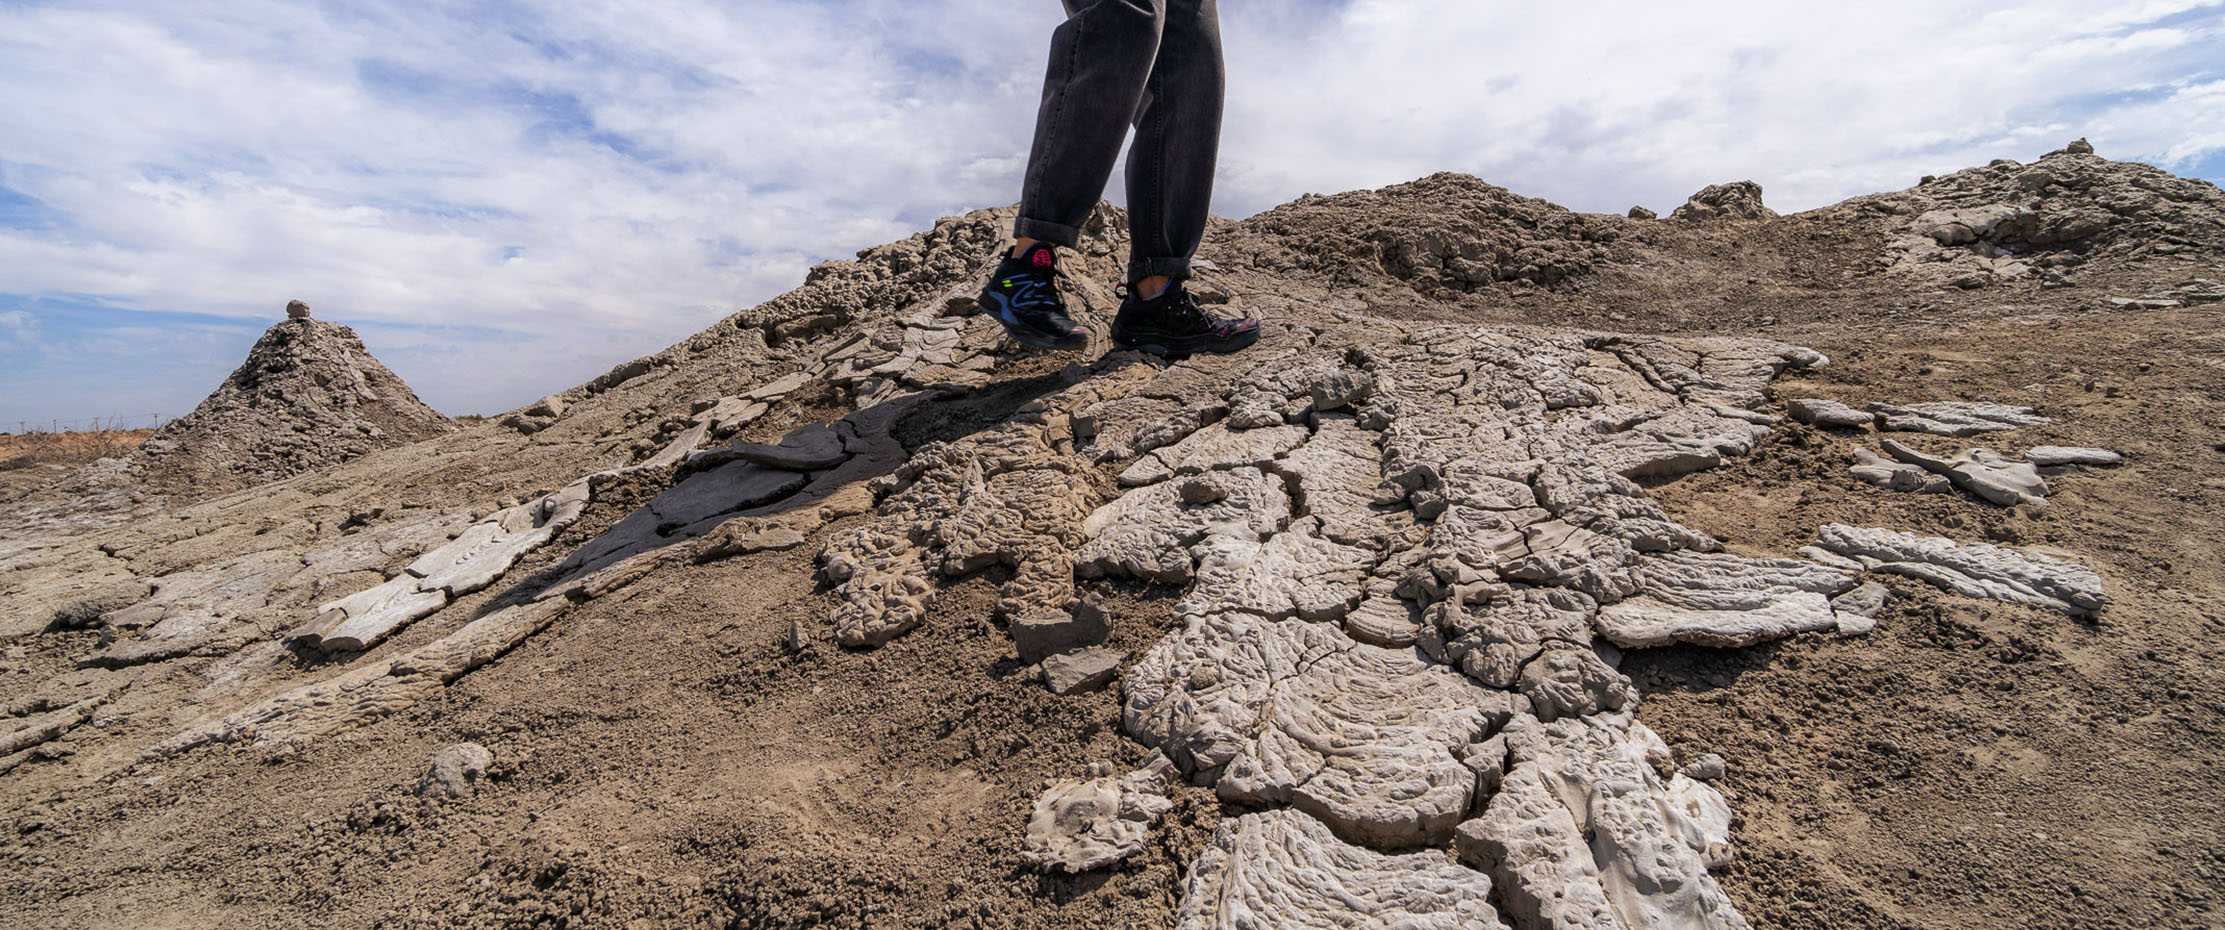 A woman walking over the dried, cracked surface of a mud volcano